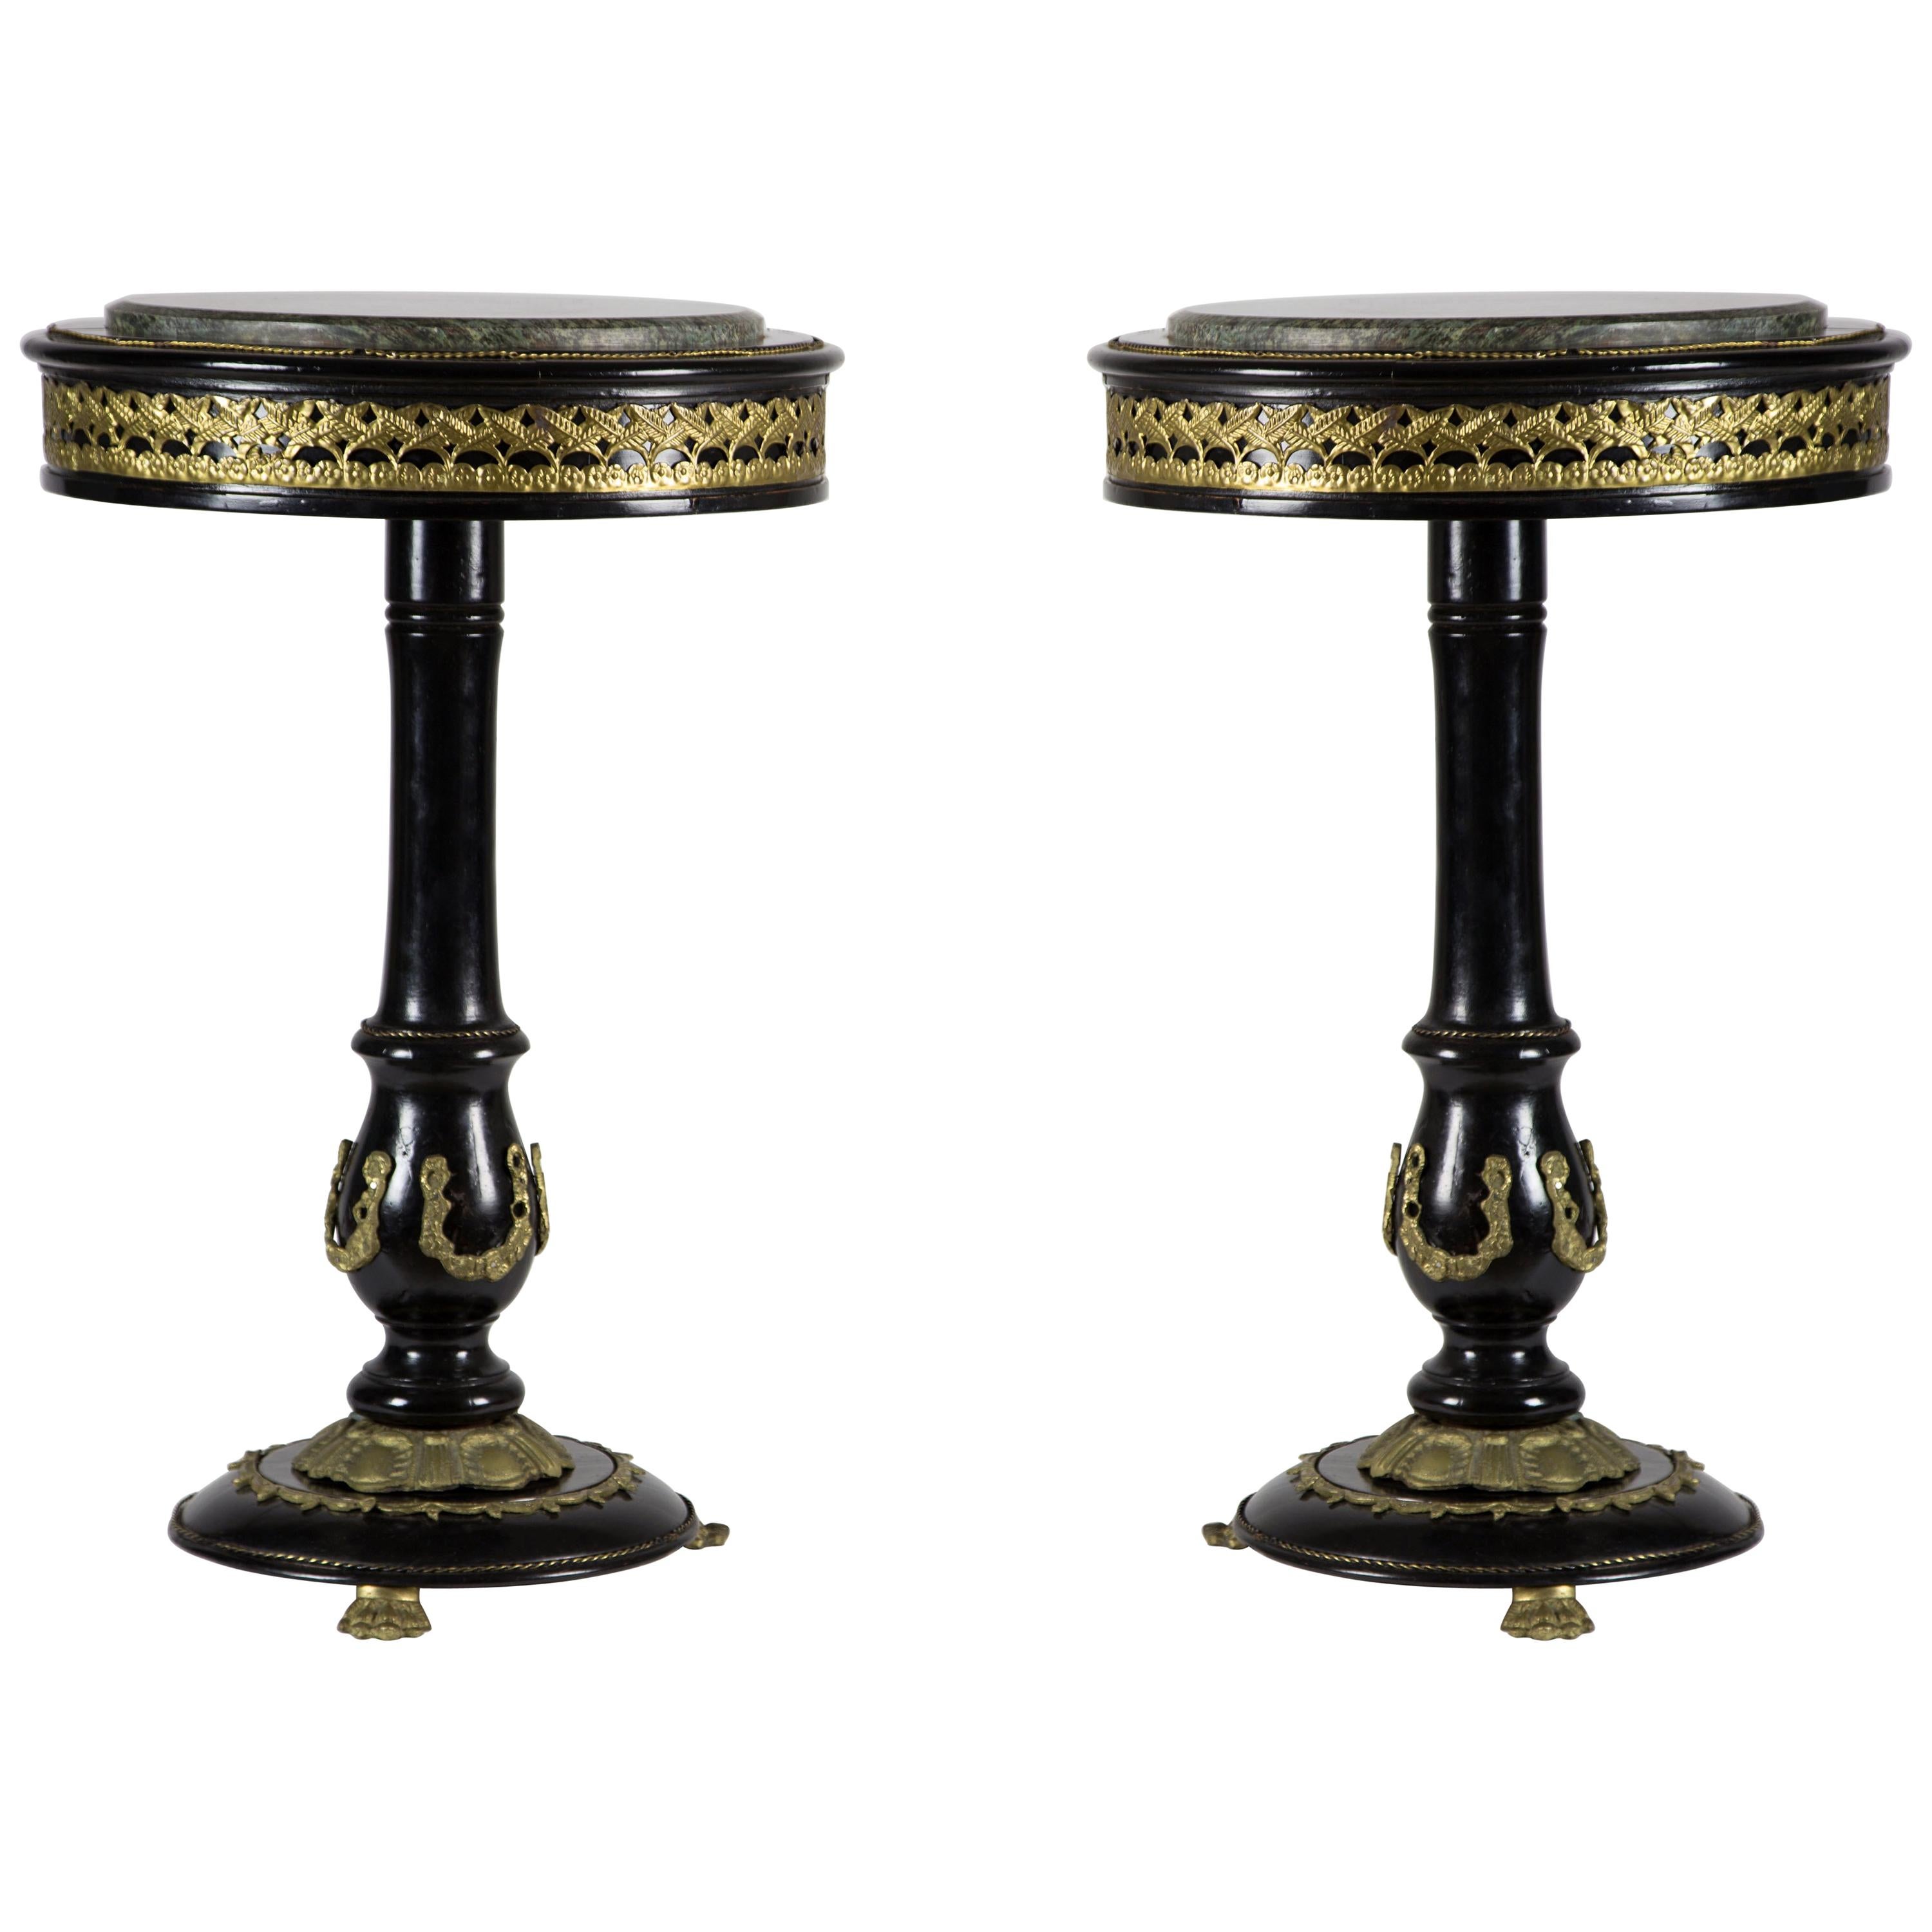 Rounded Gueridon Black Wood and Golden Bronzes Friezes Tables, France, 1950s